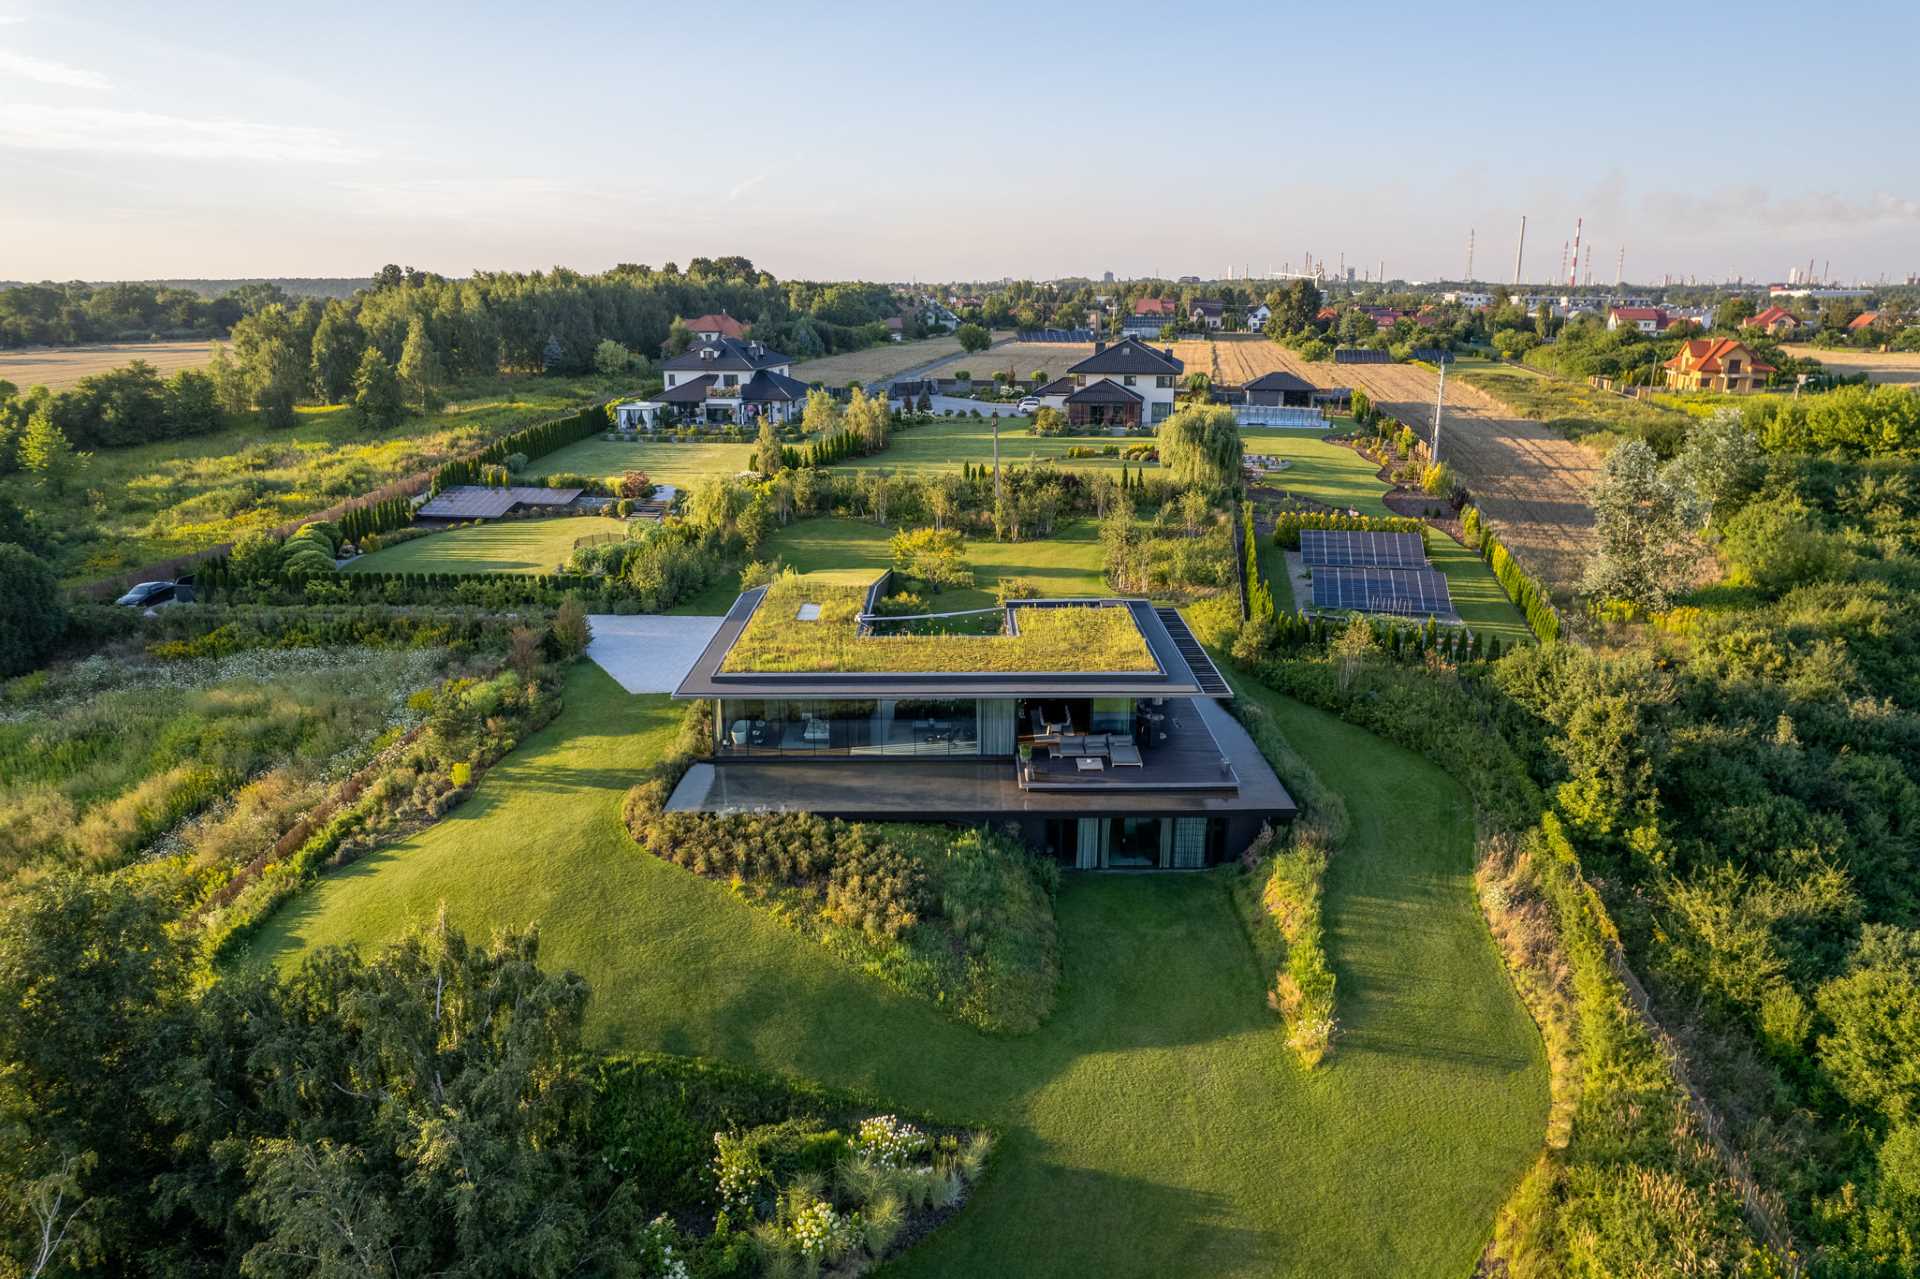 This modern home has been designed to subtly integrate into the natural shape of the land, and allows for a usable green roof.